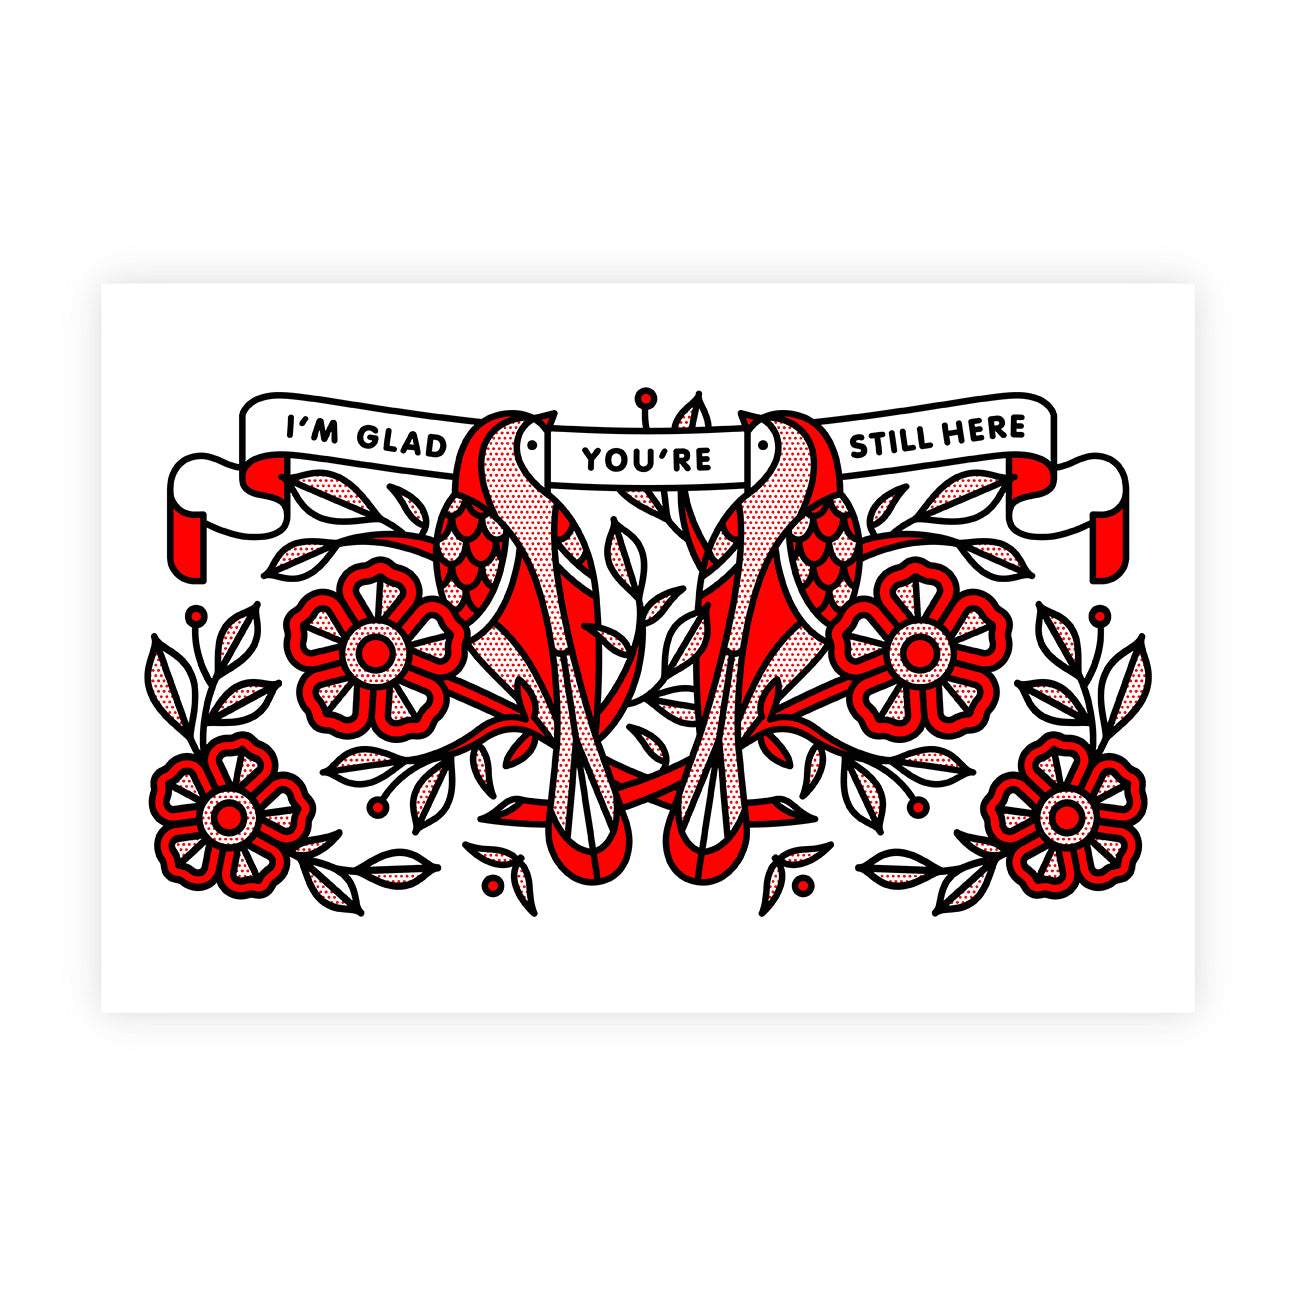 A 12”x18 art print by Red Halftone. Two birds sitting on flowered branches looking at one another. A banner surrounding them reads: I’m glad you’re still here. The color palette used includes the traditional red, white and black combo used by Red Halftone.